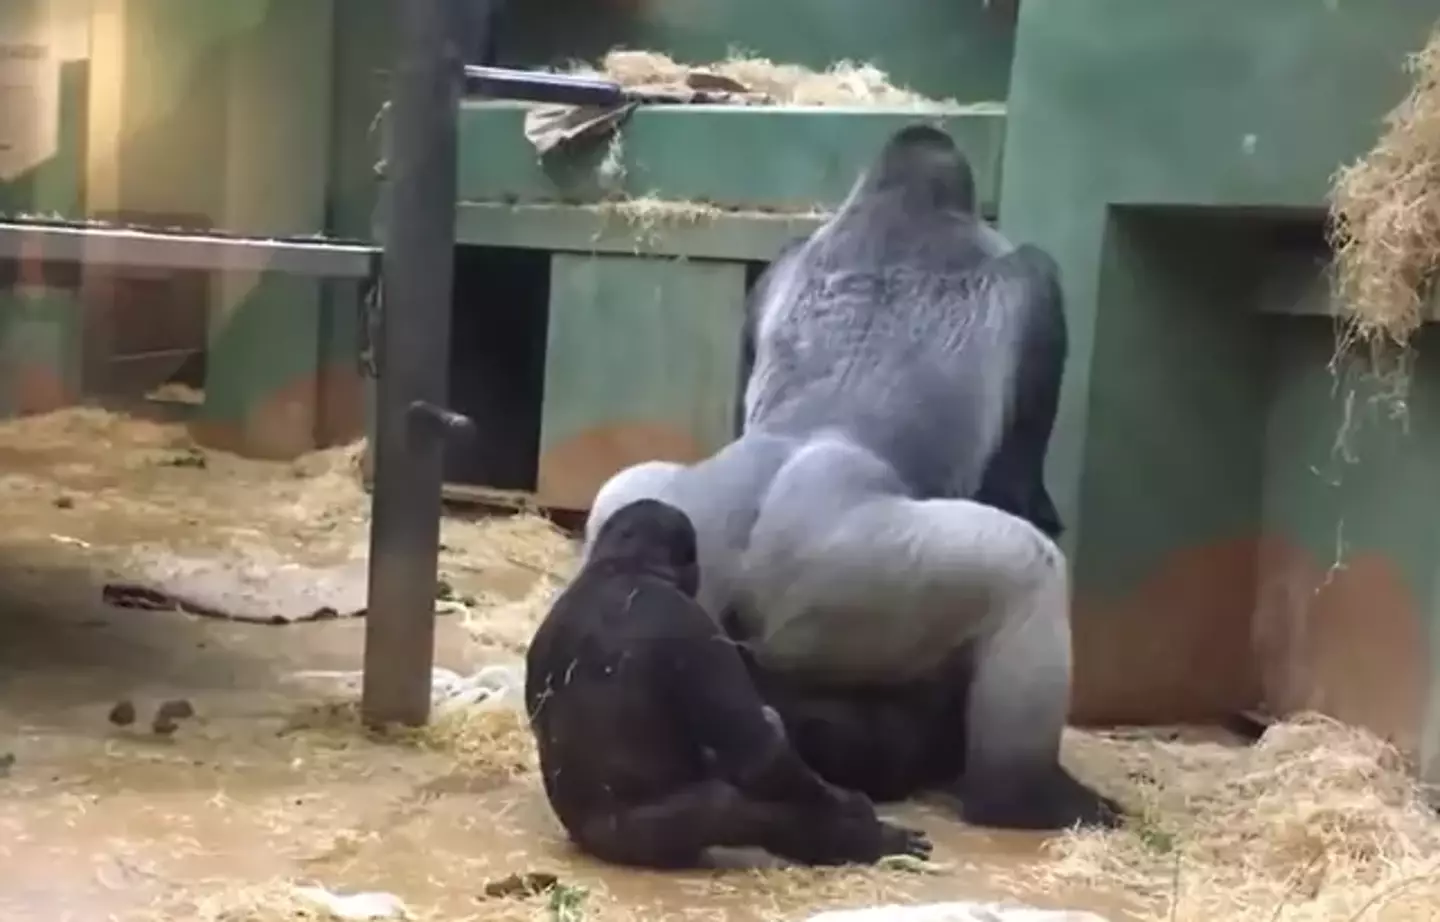 The gorillas were seen mating by zoo goers.